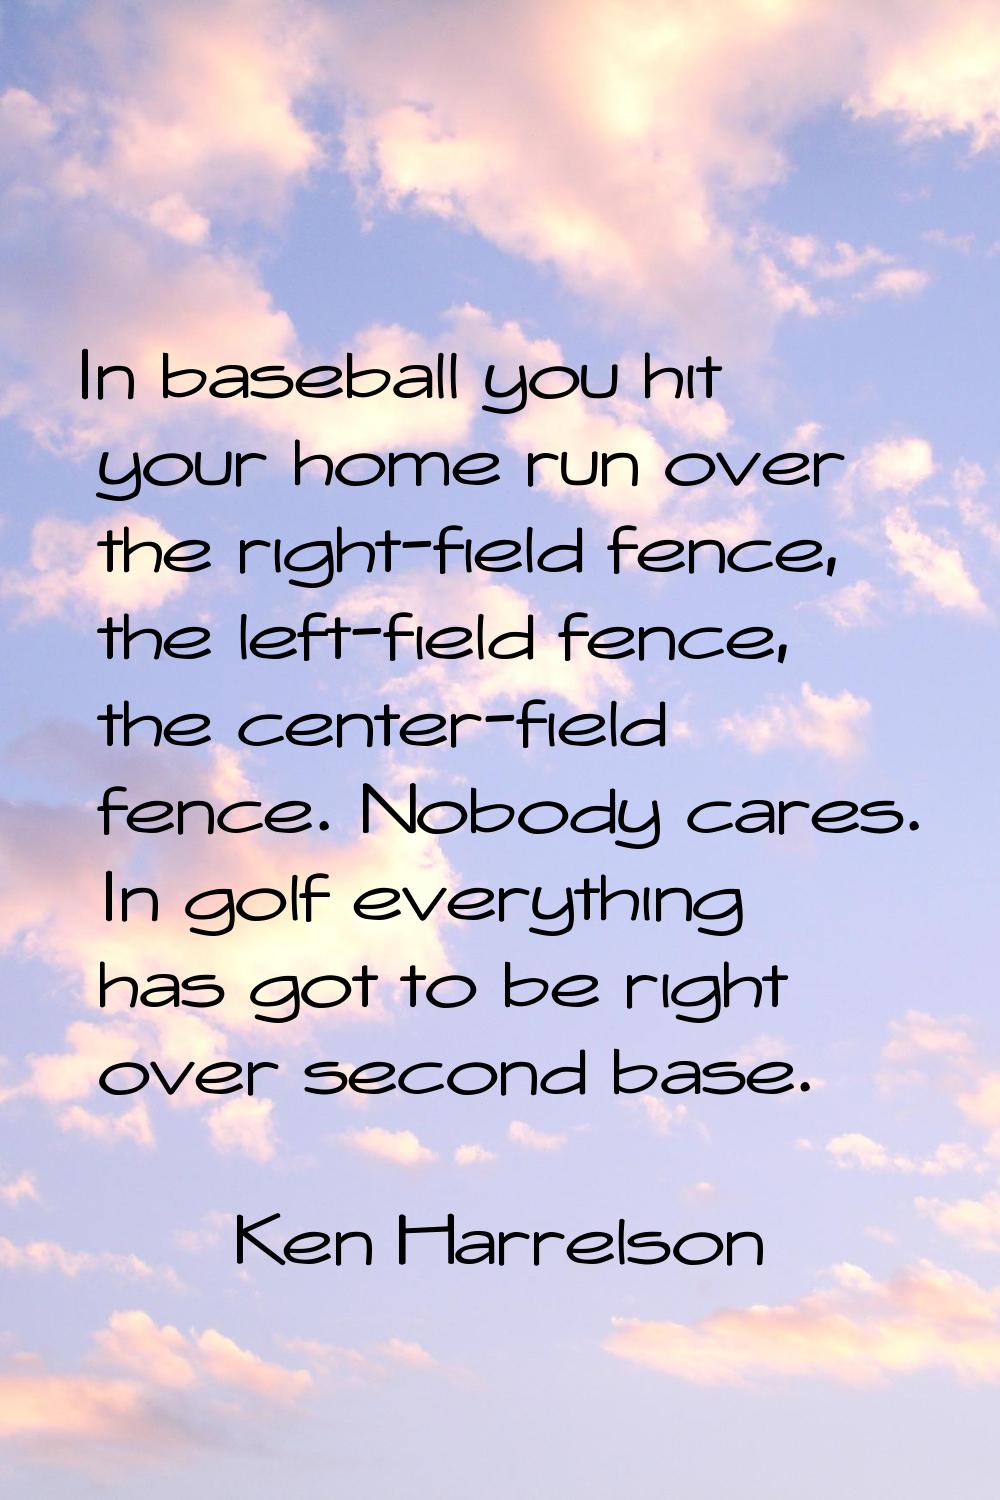 In baseball you hit your home run over the right-field fence, the left-field fence, the center-fiel